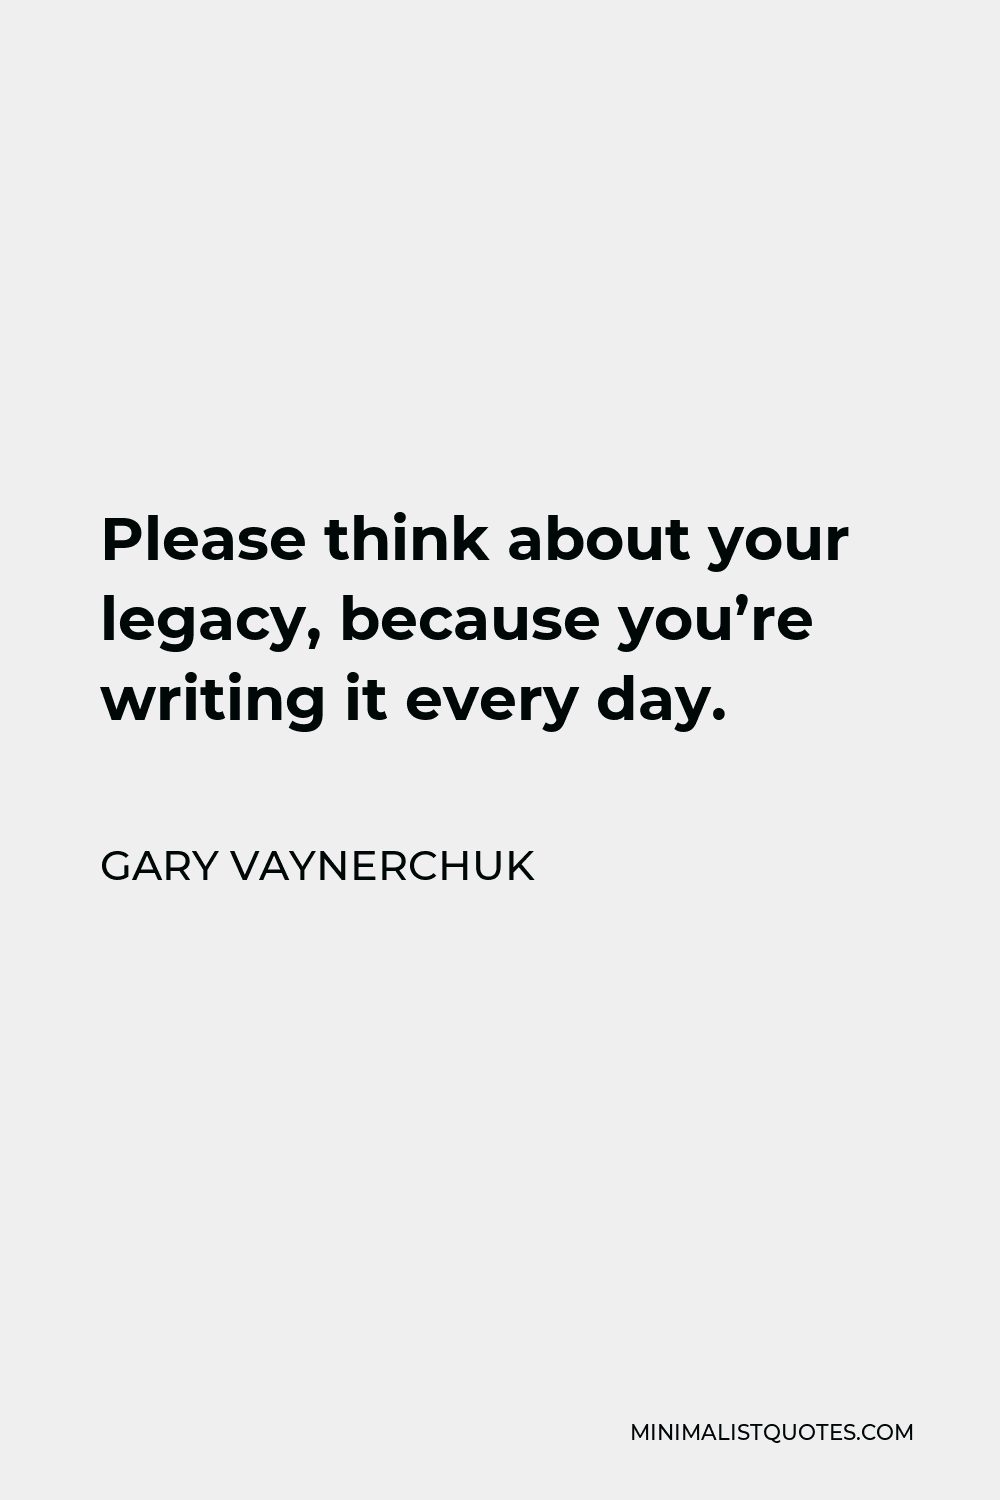 Gary Vaynerchuk Quote: “Your legacy is being written by yourself